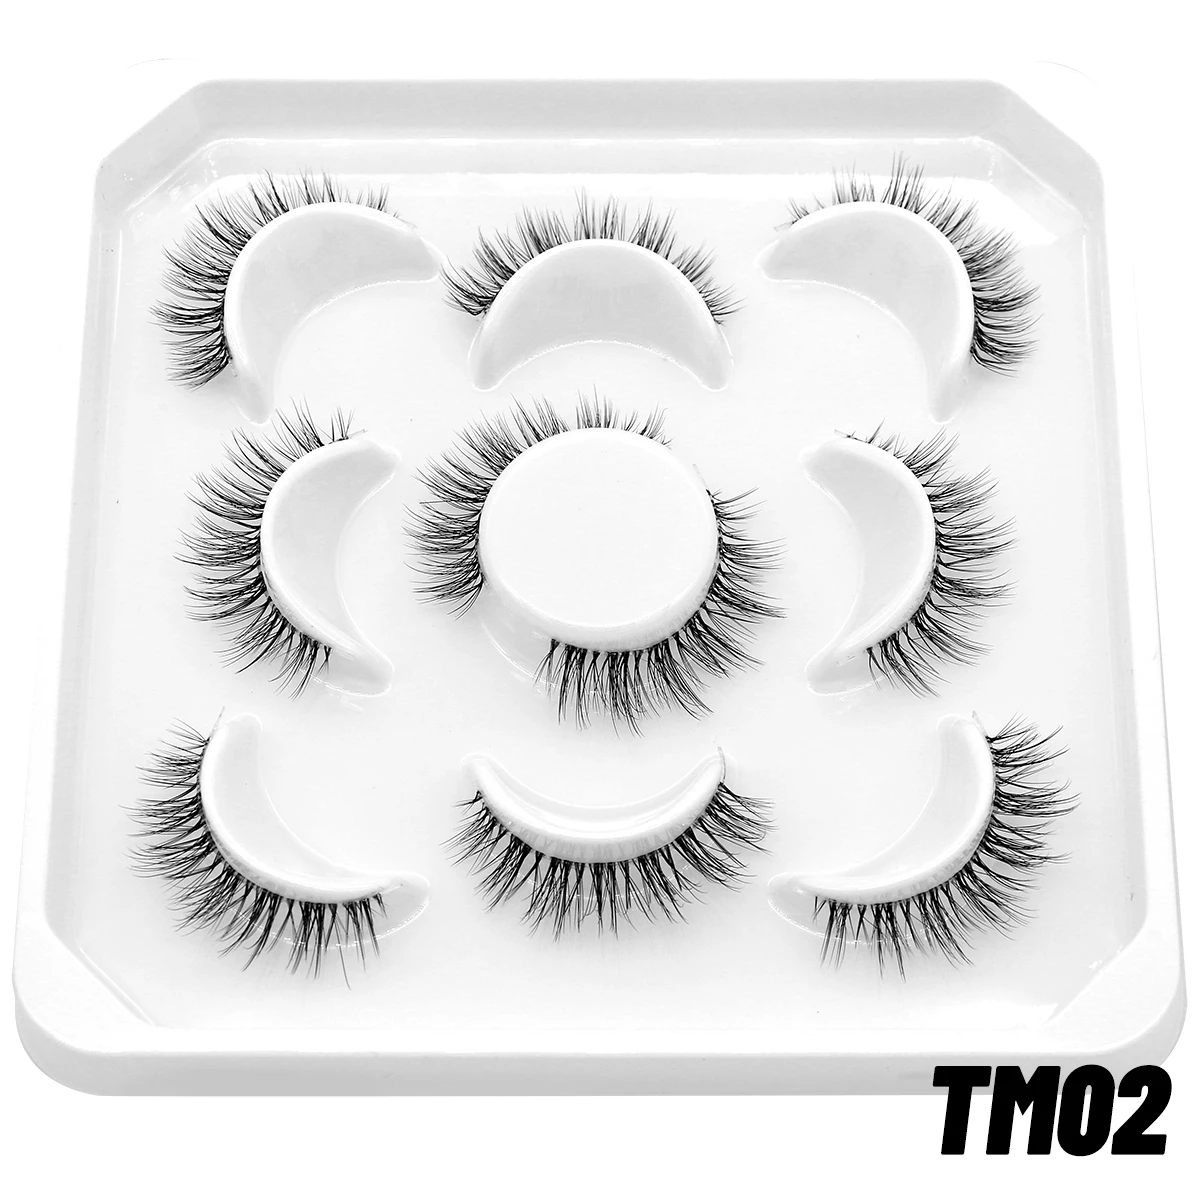 GROINNEYA Manga Lashes 5 Pairs Cosplay 3d Faux Mink Natural Short Full Strip Clear Band Soft Eyelashes Extension -Outlet Maid Outfit Store Sb687c9ced50e484586778844581fe8ccw.jpg